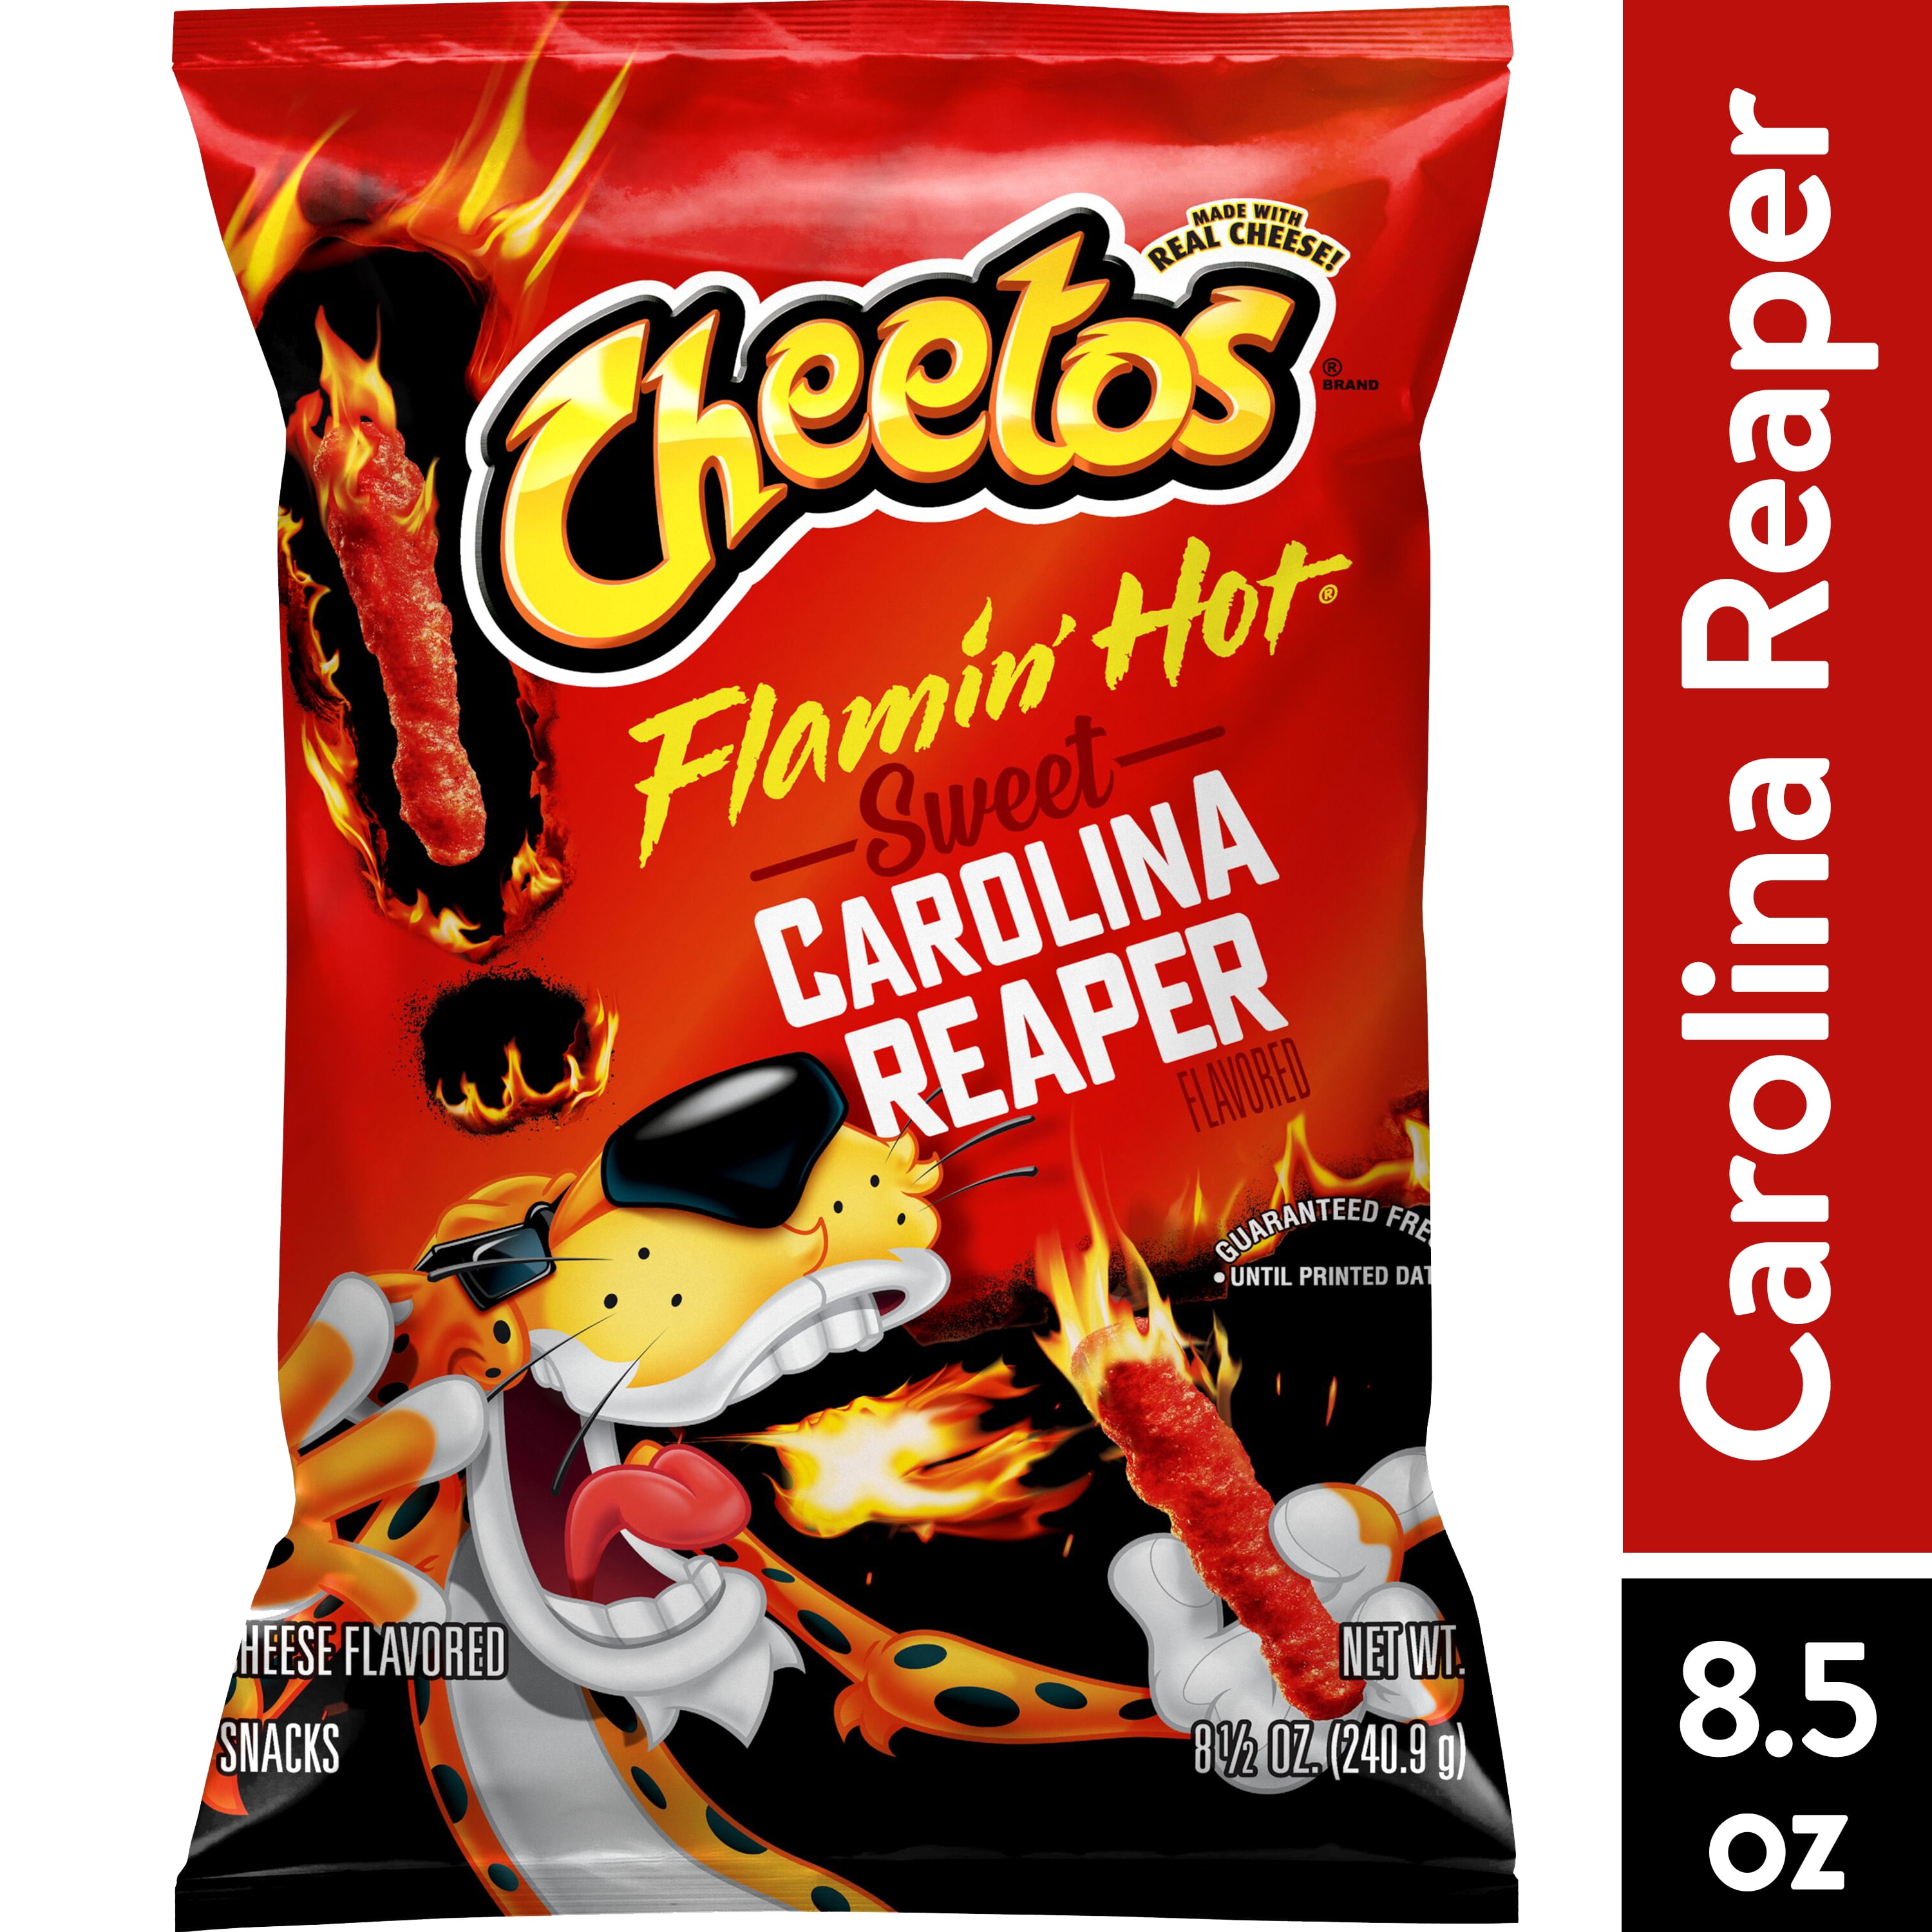 Chesters Flamin Hot Fries 5/8oz Bag